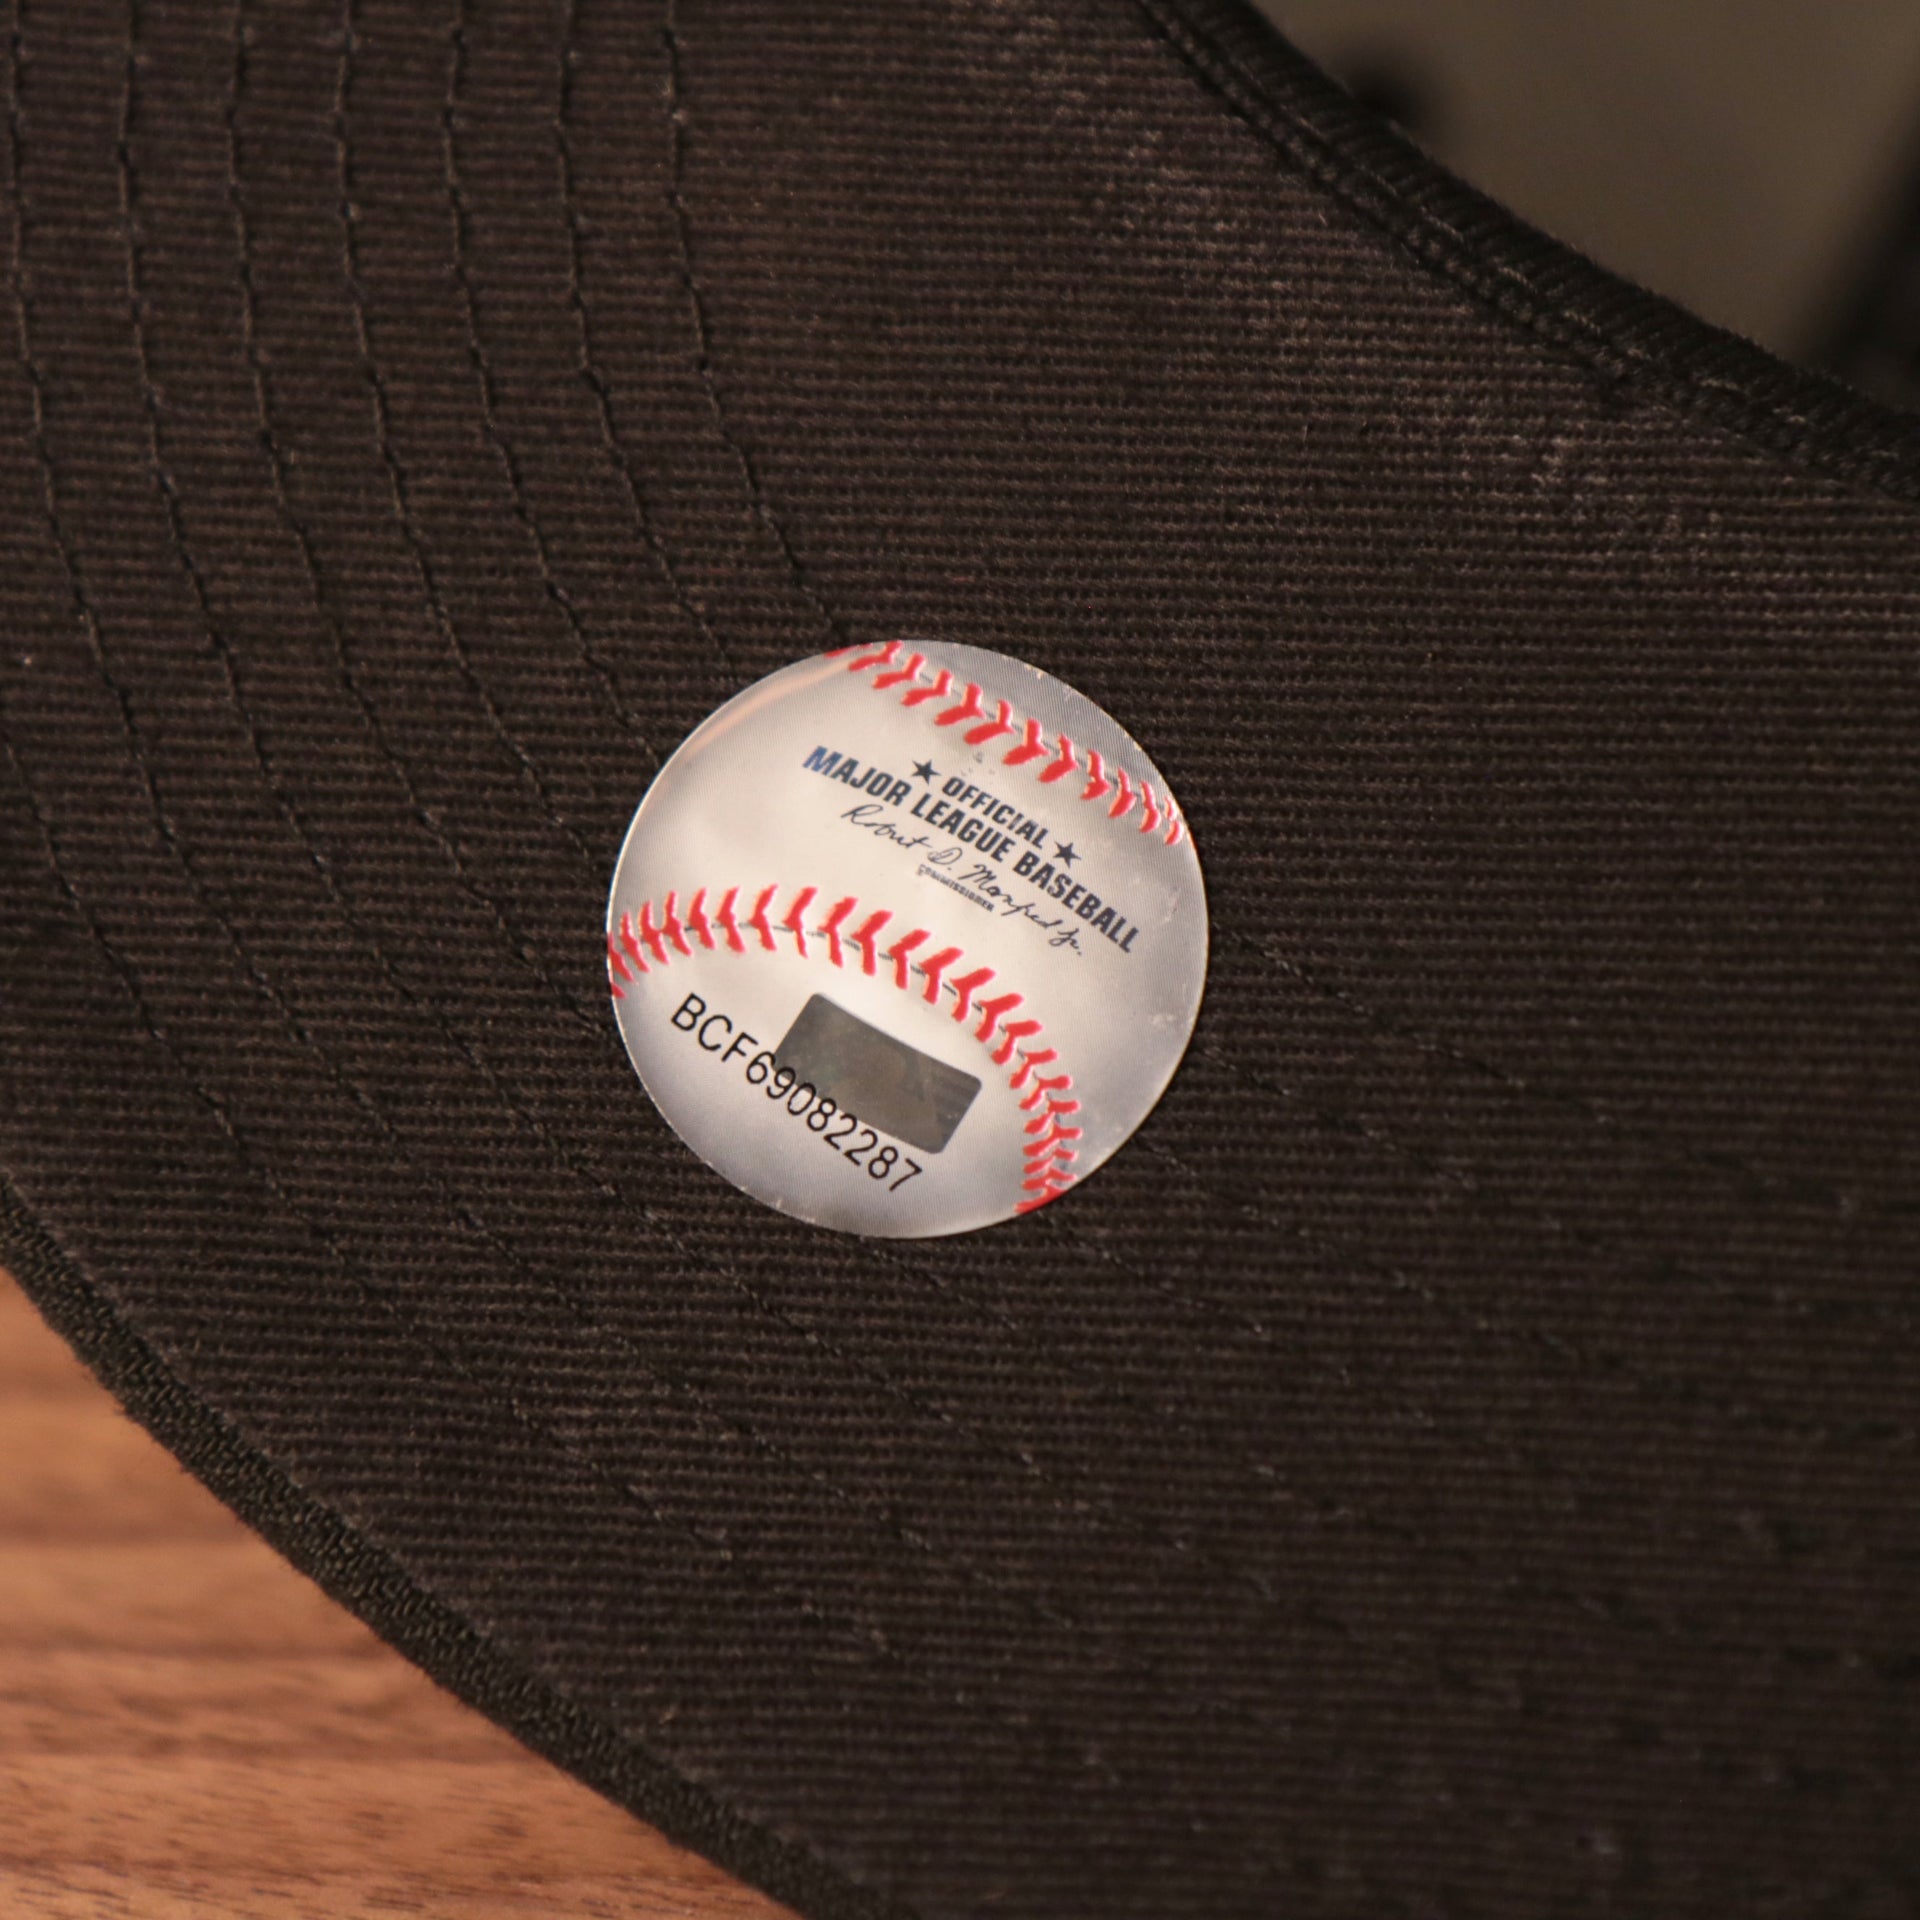 The official Major League Baseball logo on the black bottom fitted 59fifty for the Pittsburgh Pirates.